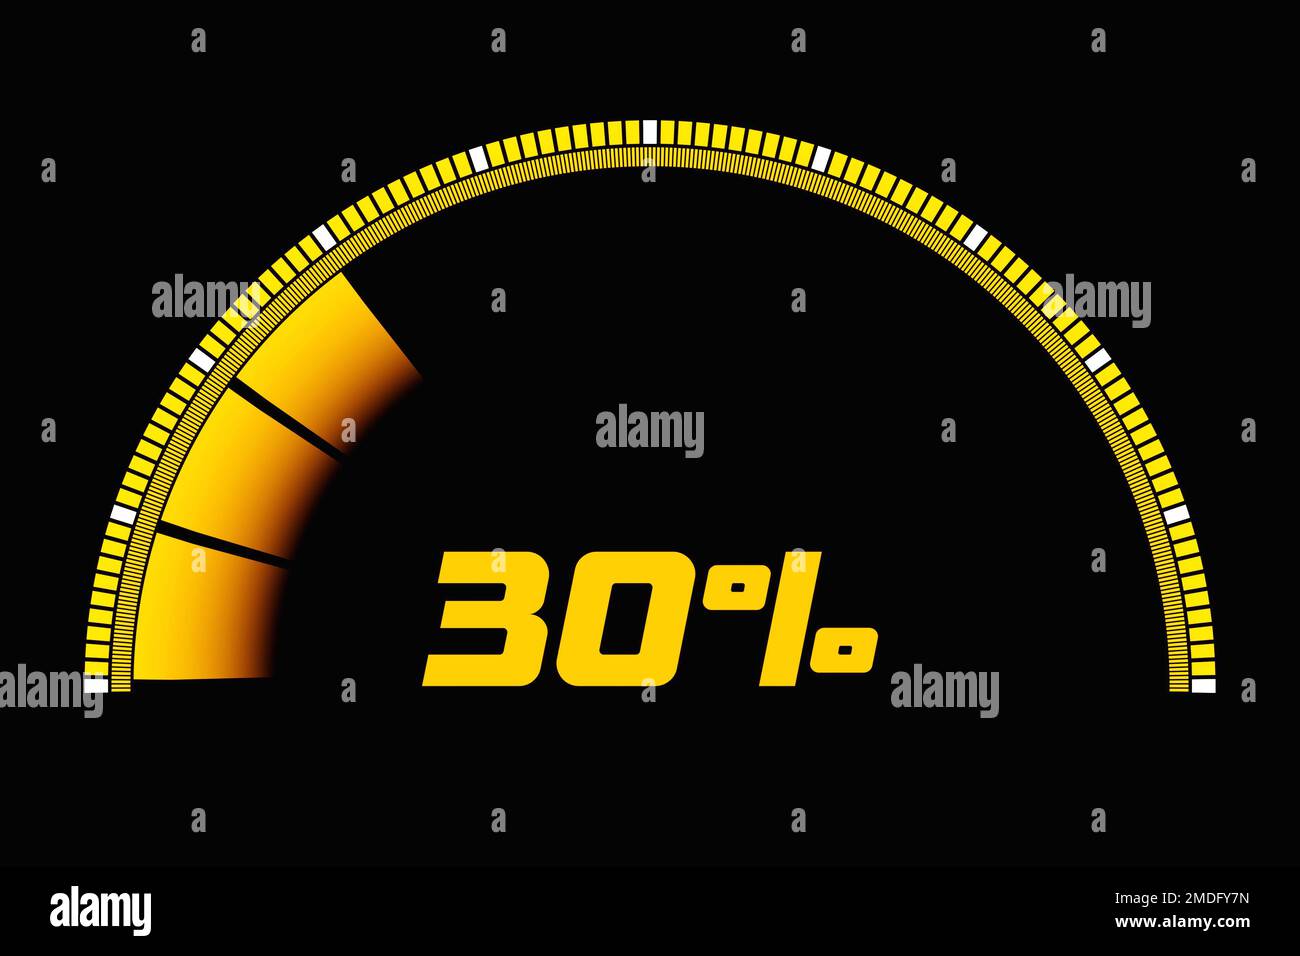 3d illustration of speed measuring speed icon.  Orange speedometer icon, speedometer pointer points to orange normal color Stock Photo